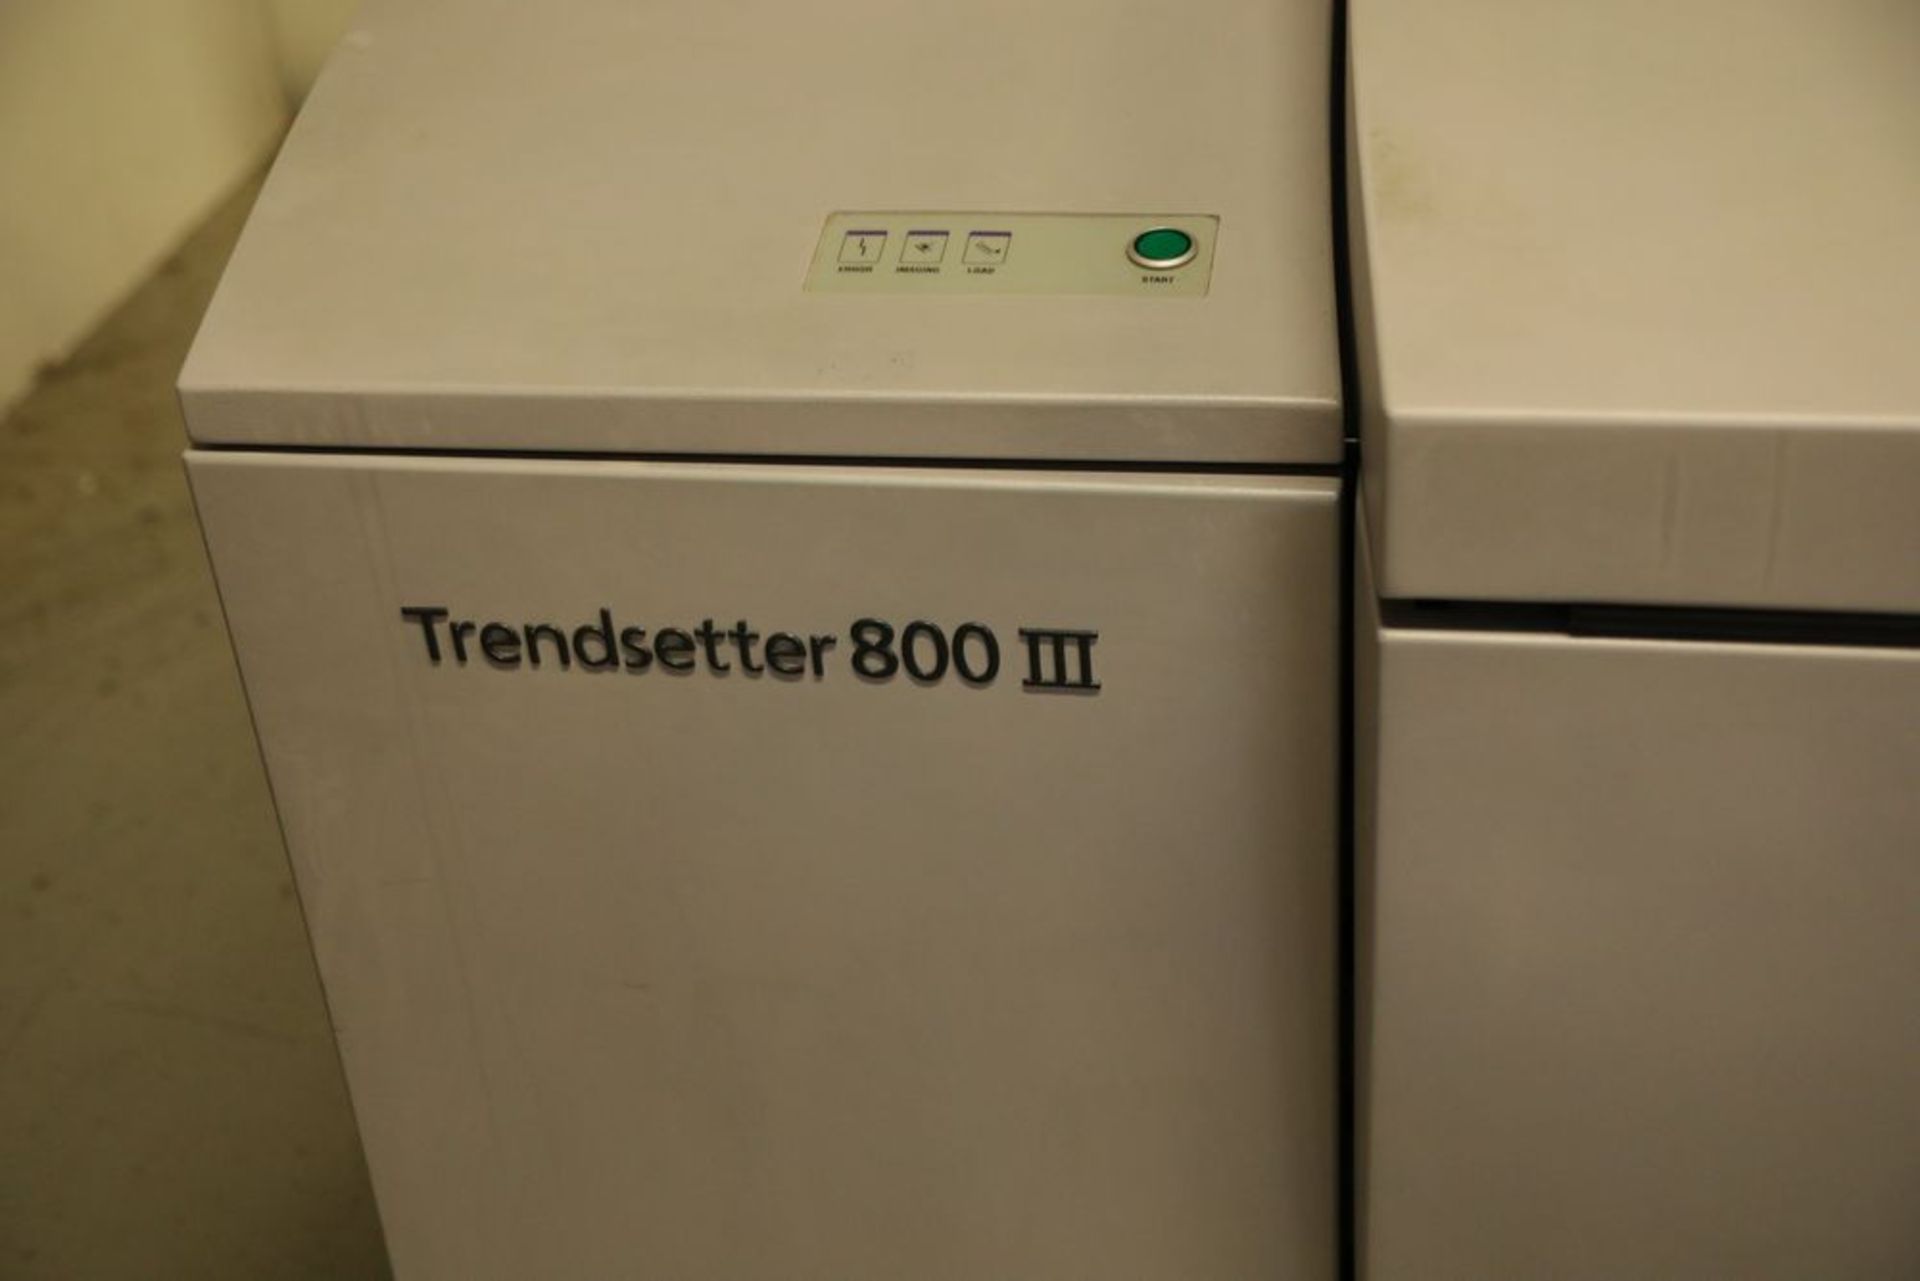 2007 Kodak Trendsetter Model 800-3 Quantum CTP engine with Onyx RIP, Server and PC - Image 3 of 6